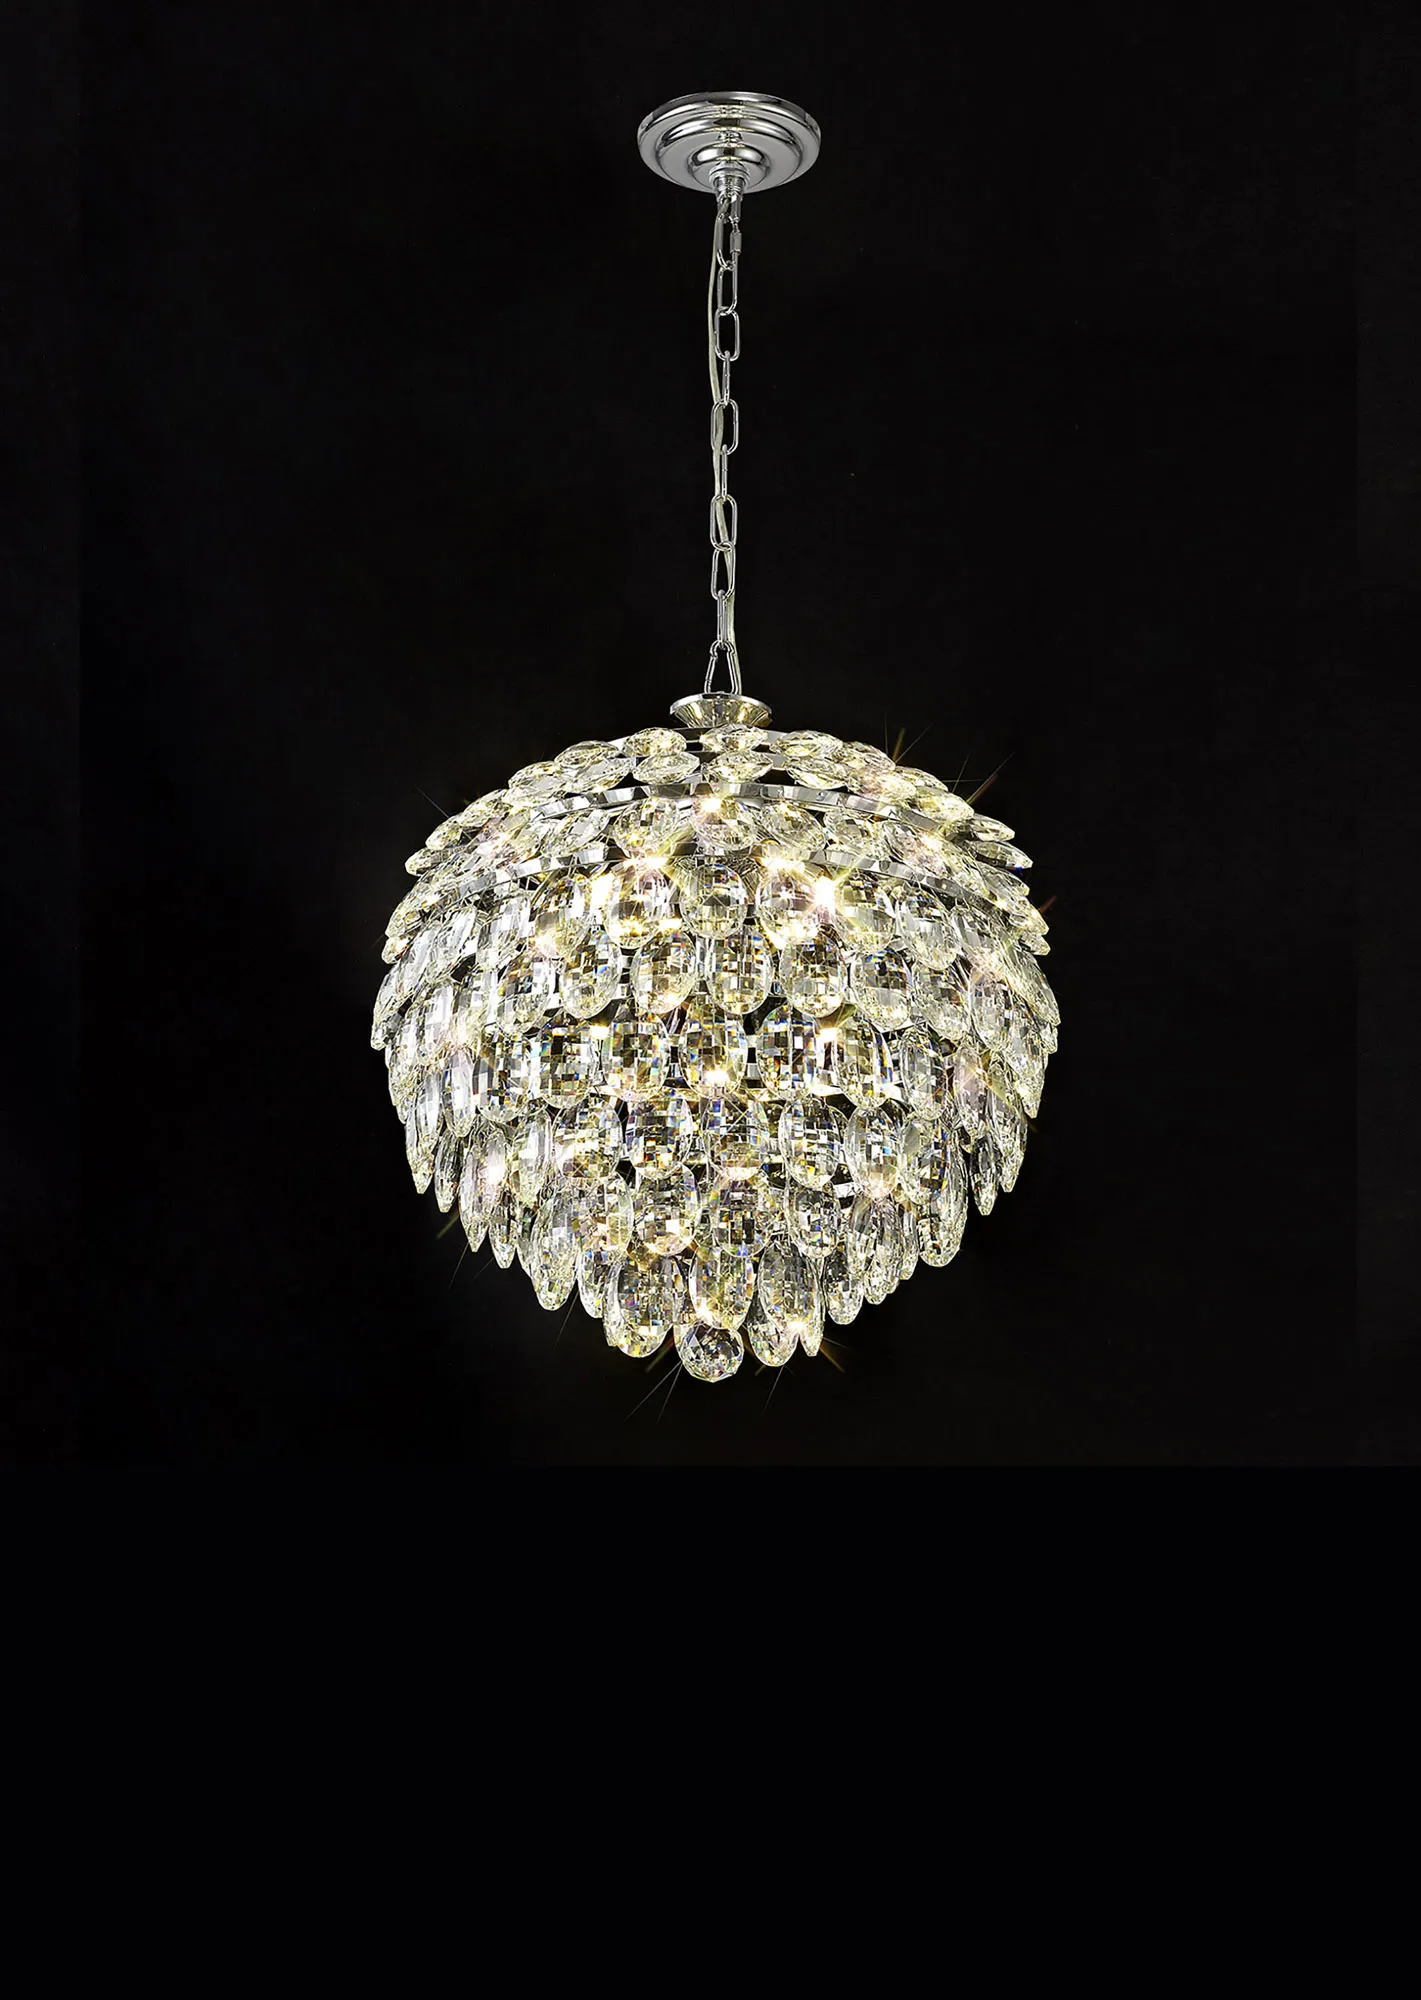 Coniston Polished Chrome Crystal Ceiling Lights Diyas Spherical Crystal Fittings